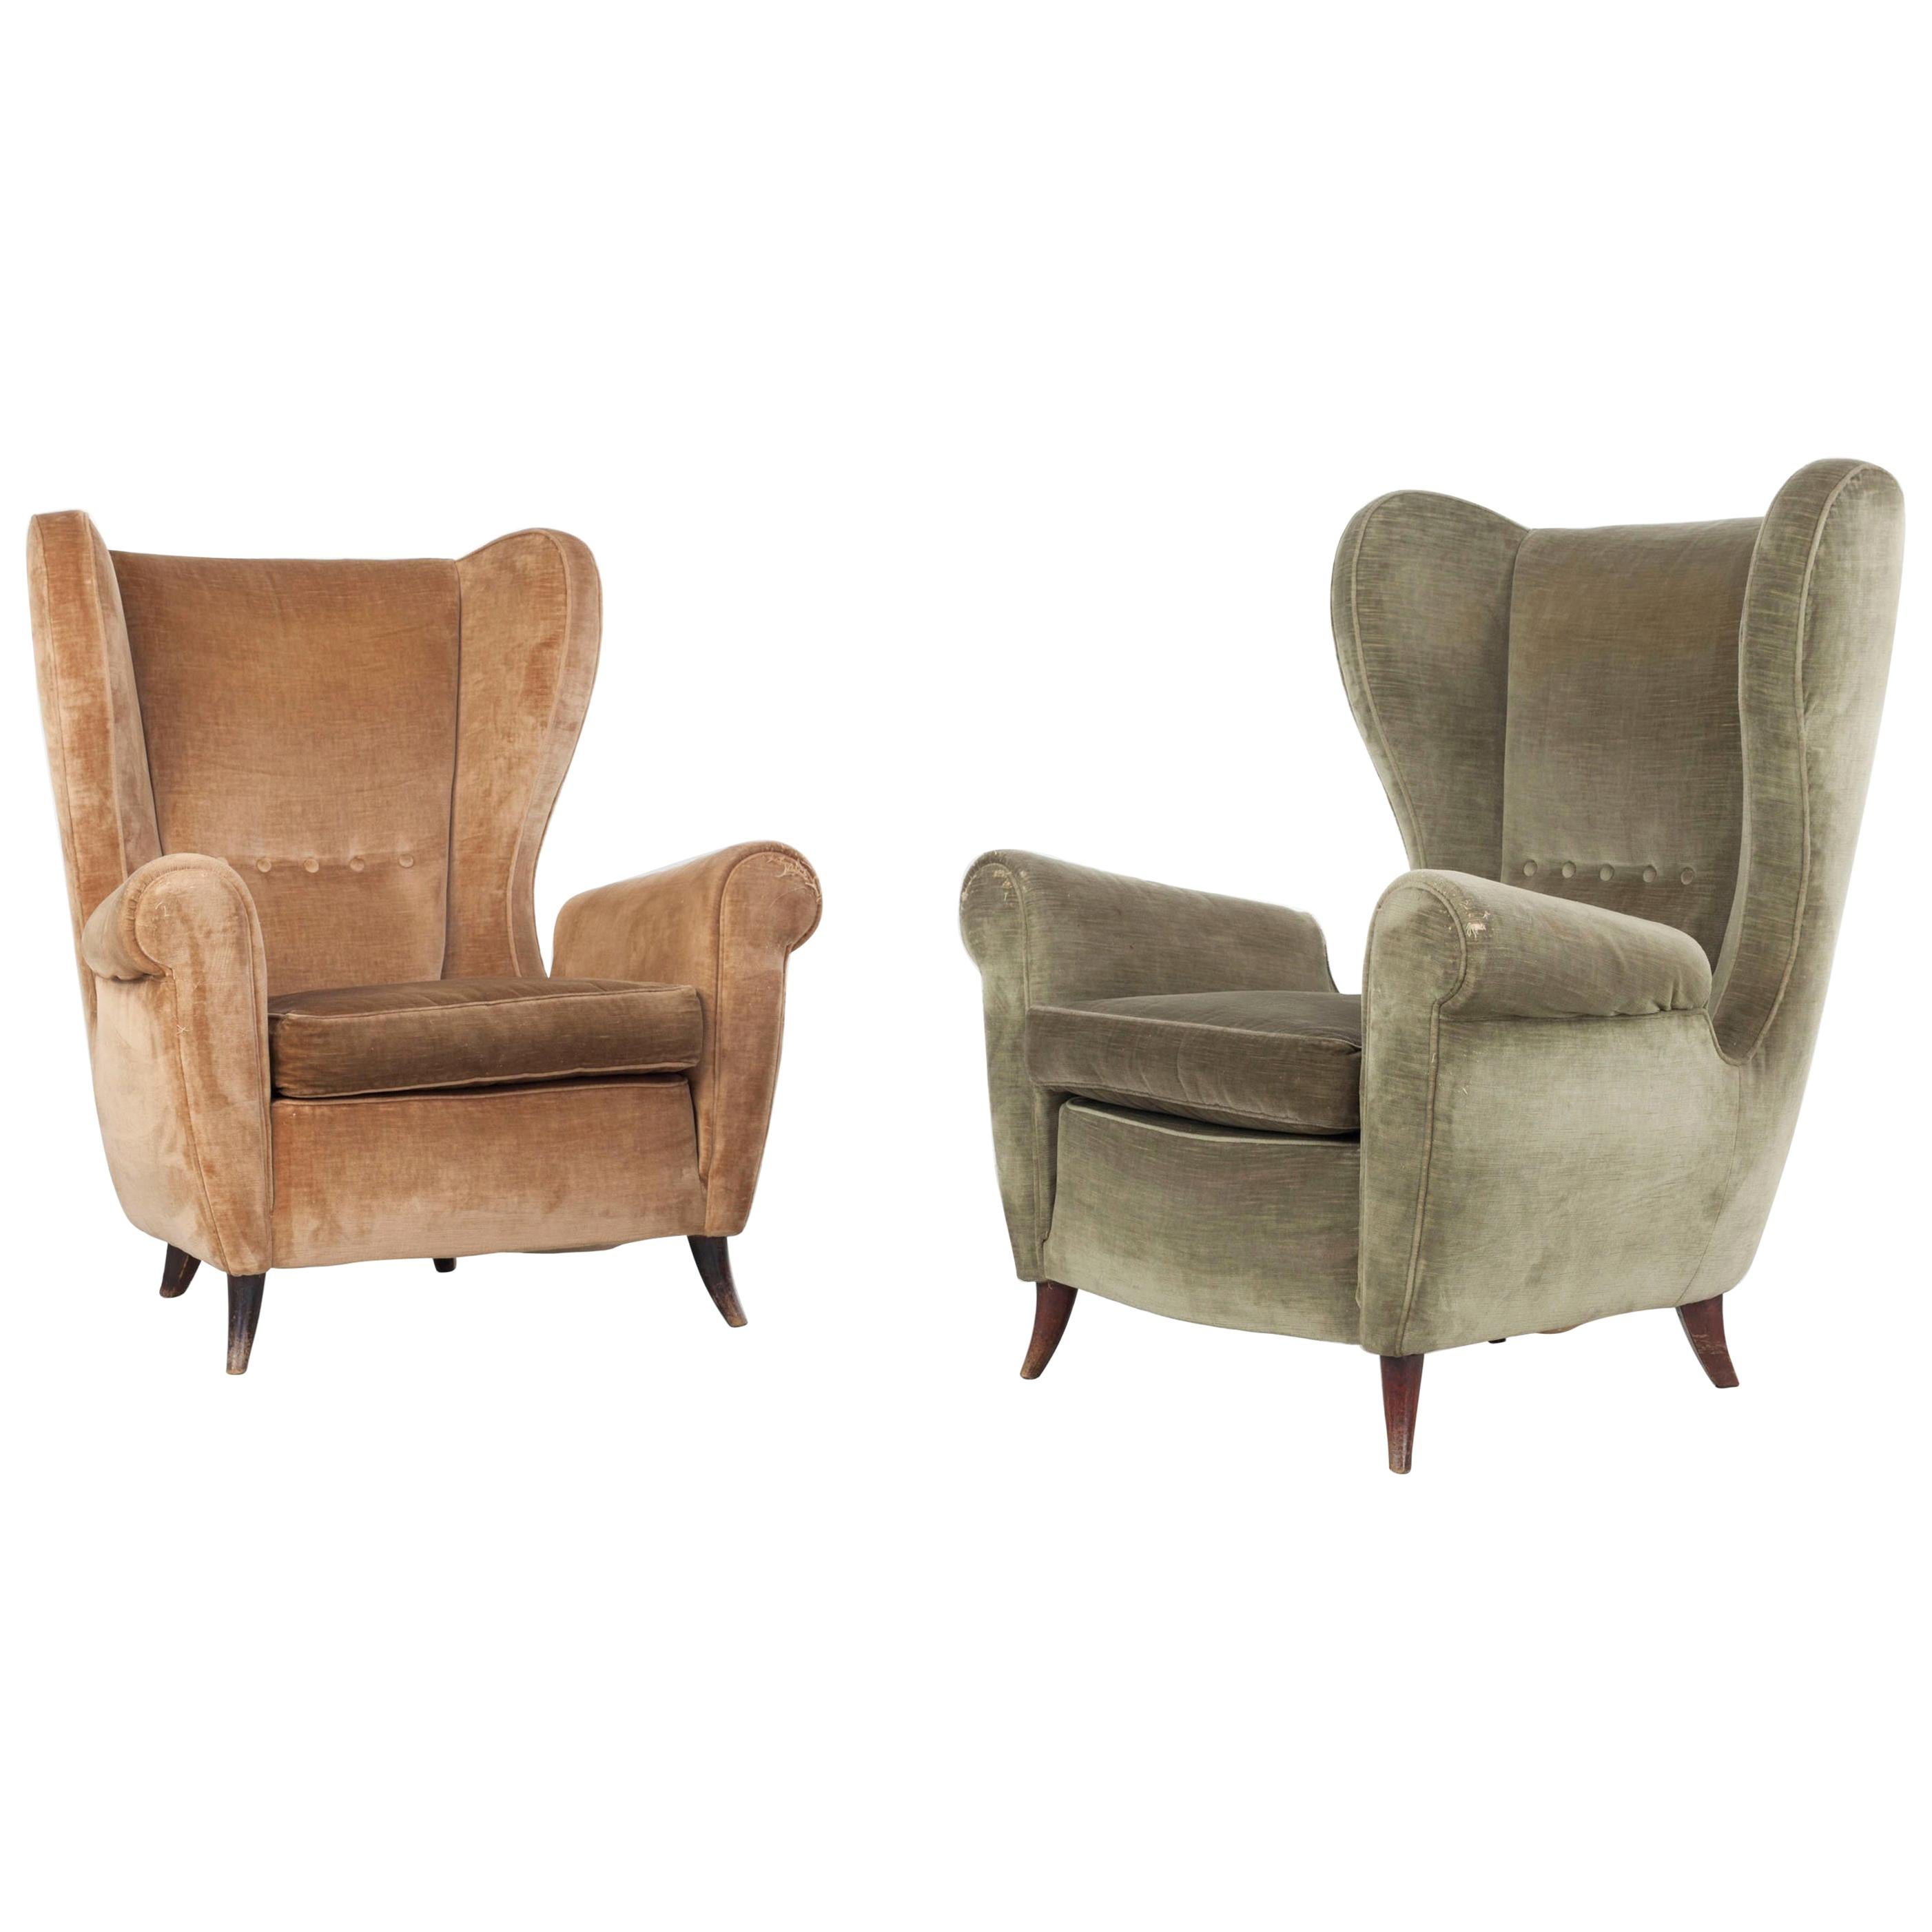 Set of Two Italian Armchairs in Original Upholstery of Brown and Green, 1950s